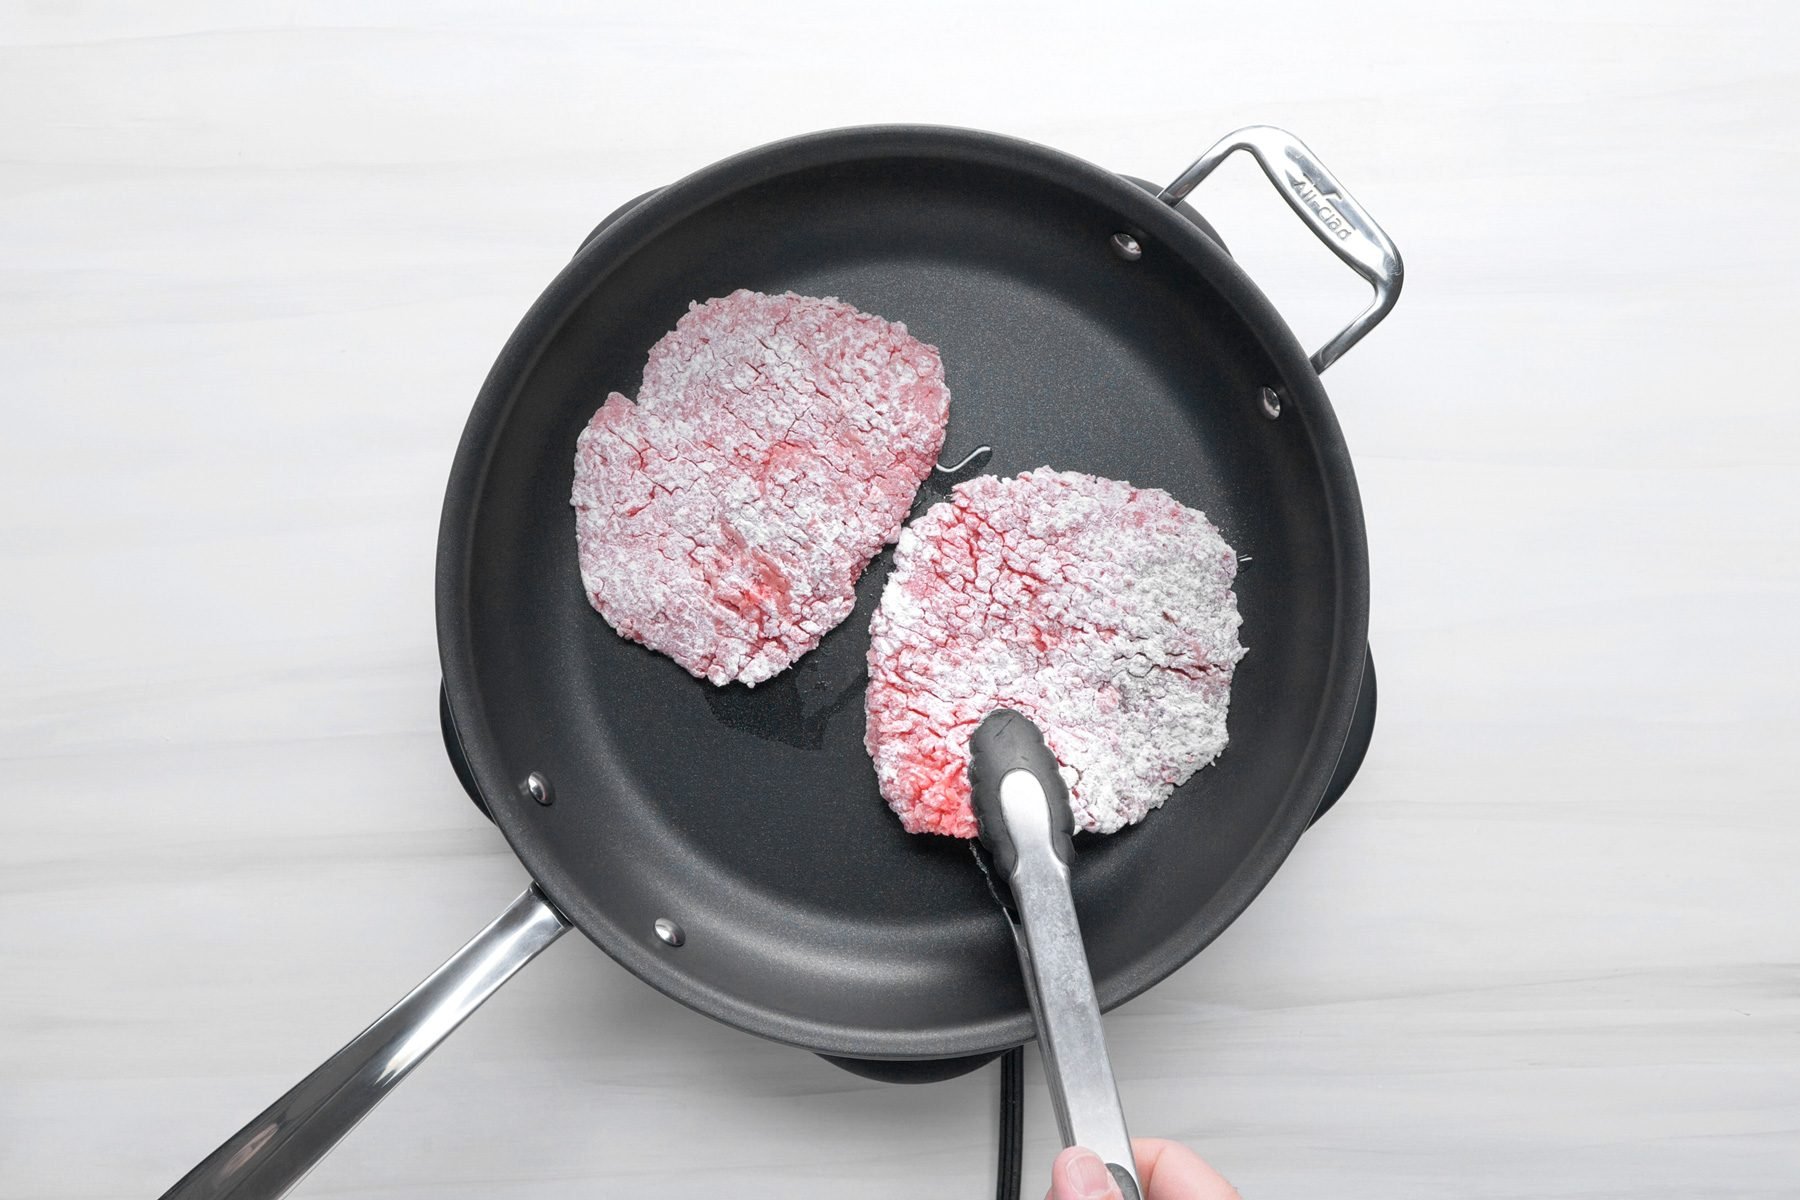 Beef cube steaks cooking in oil in a large skillet